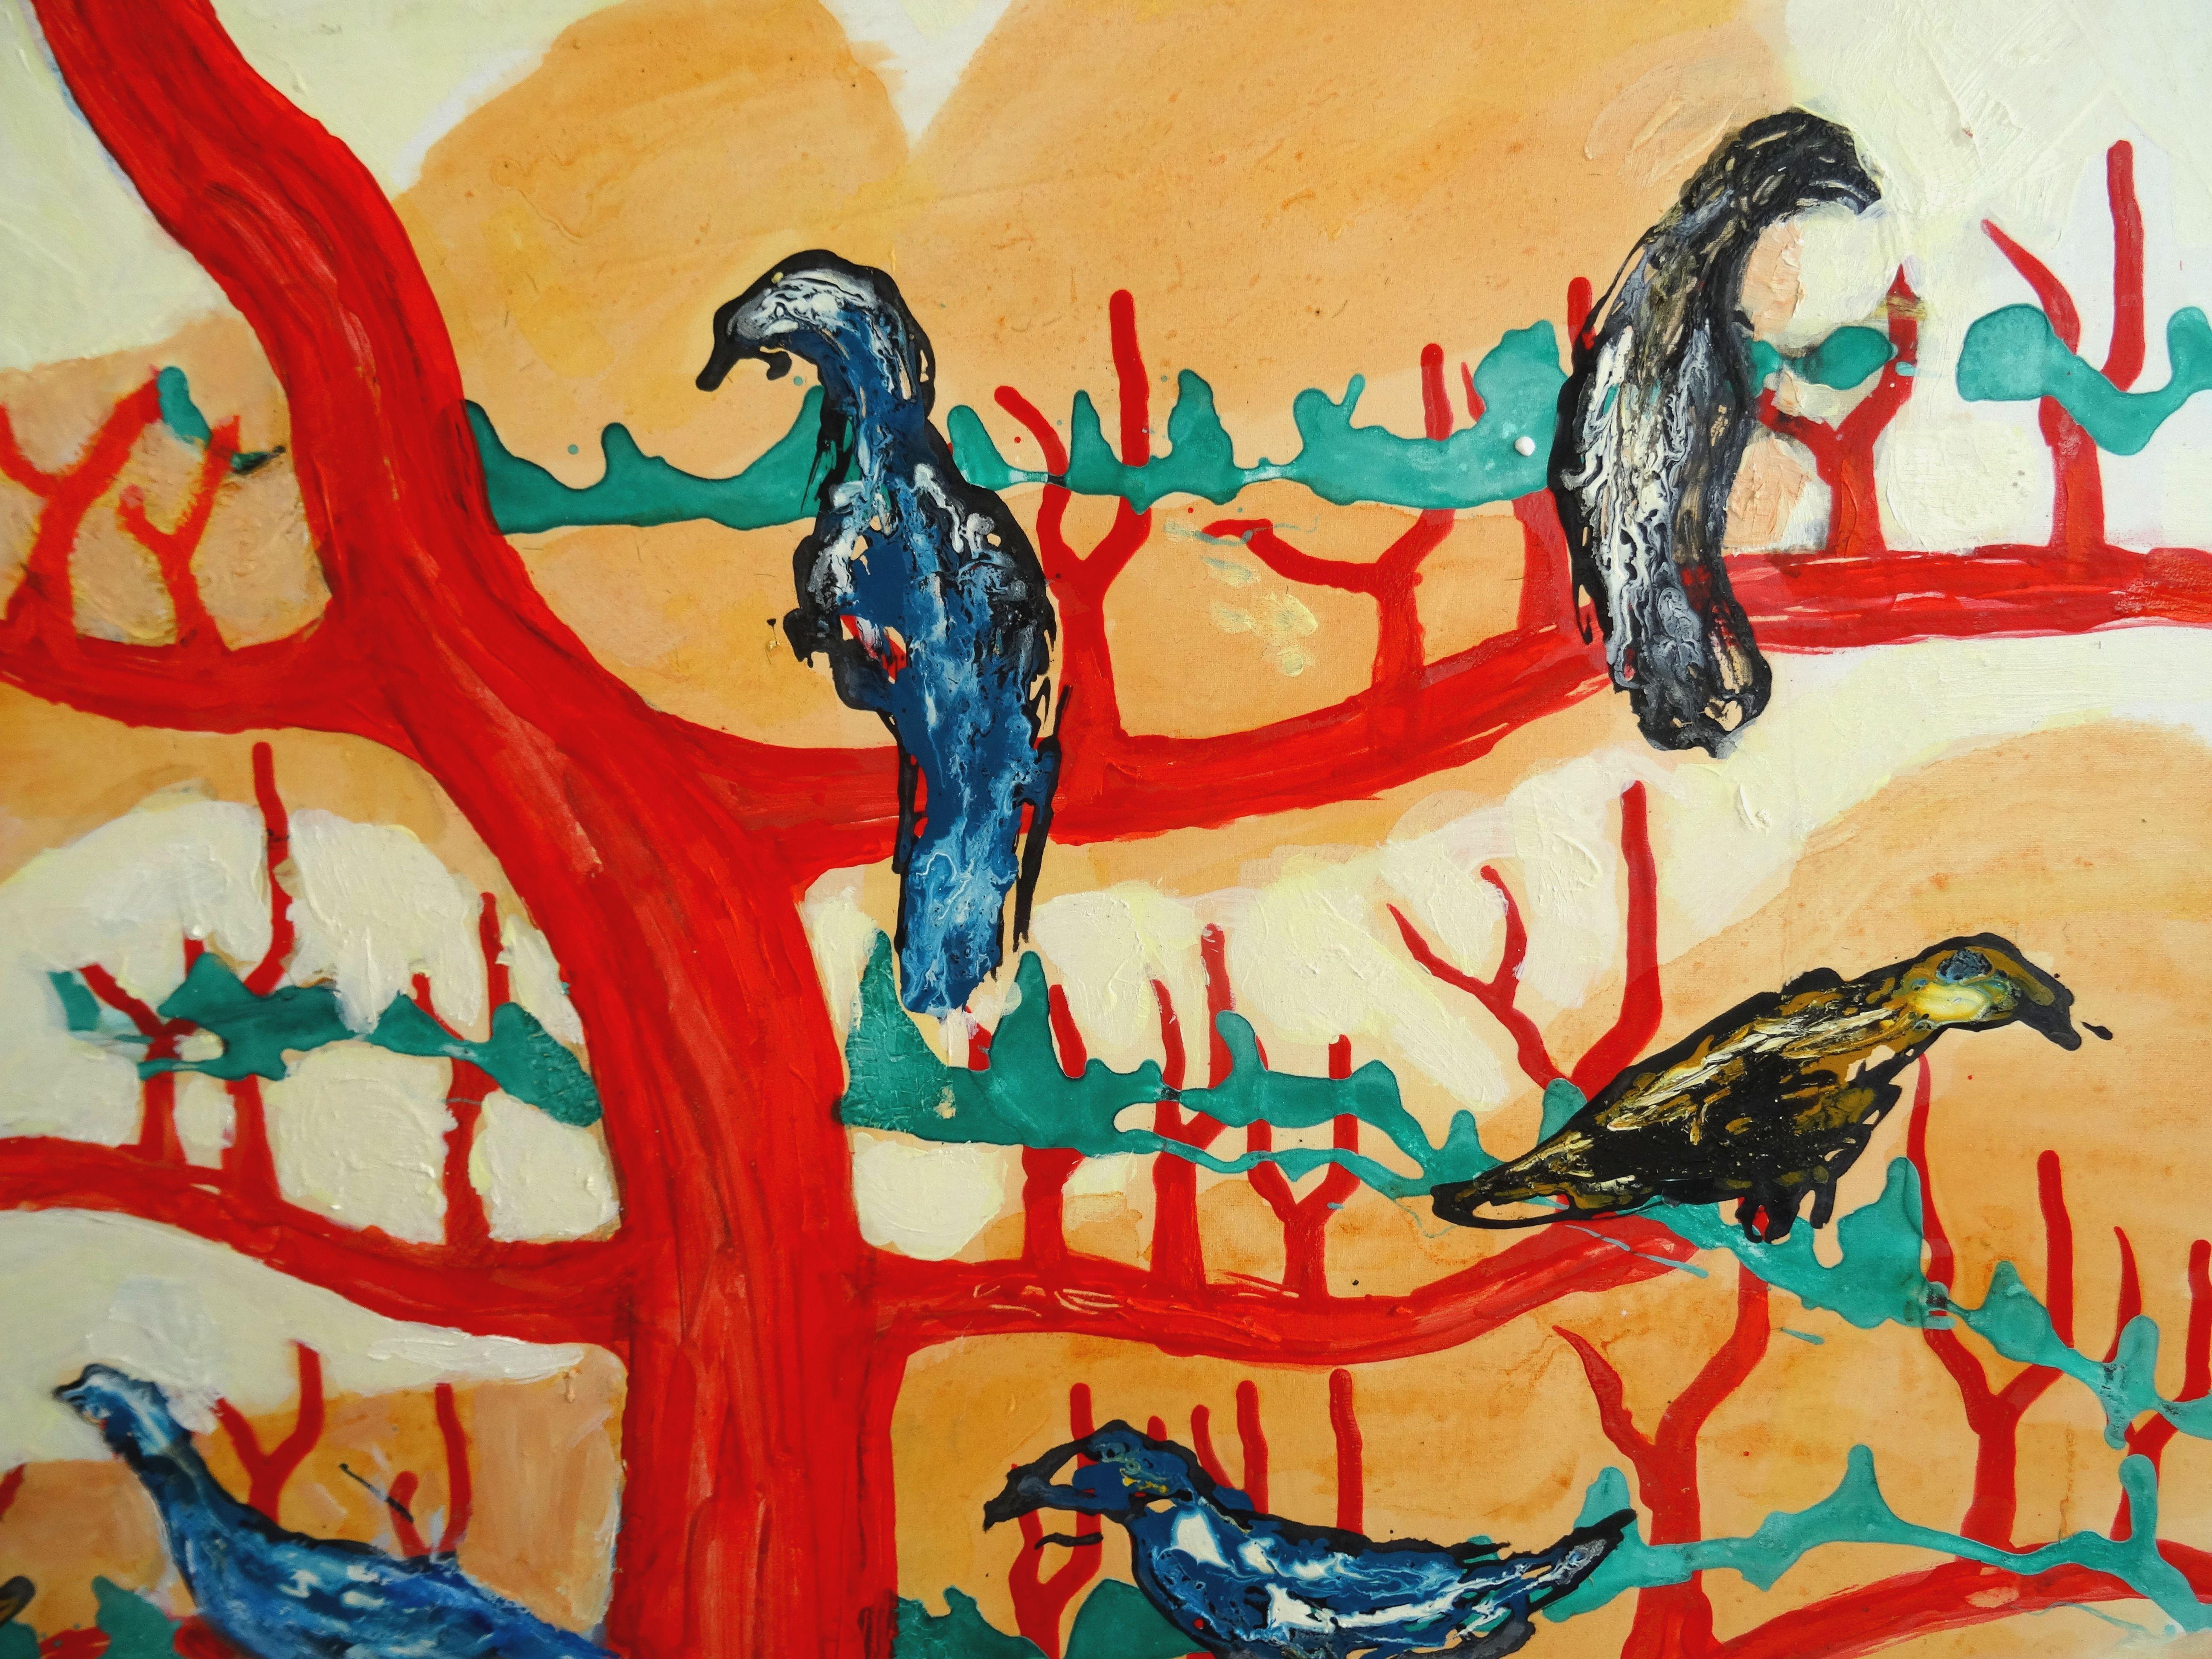 Large and small birds on red tree. 2015. Oil on canvas, 95x85 cm - Painting by Alexander Lozovoy